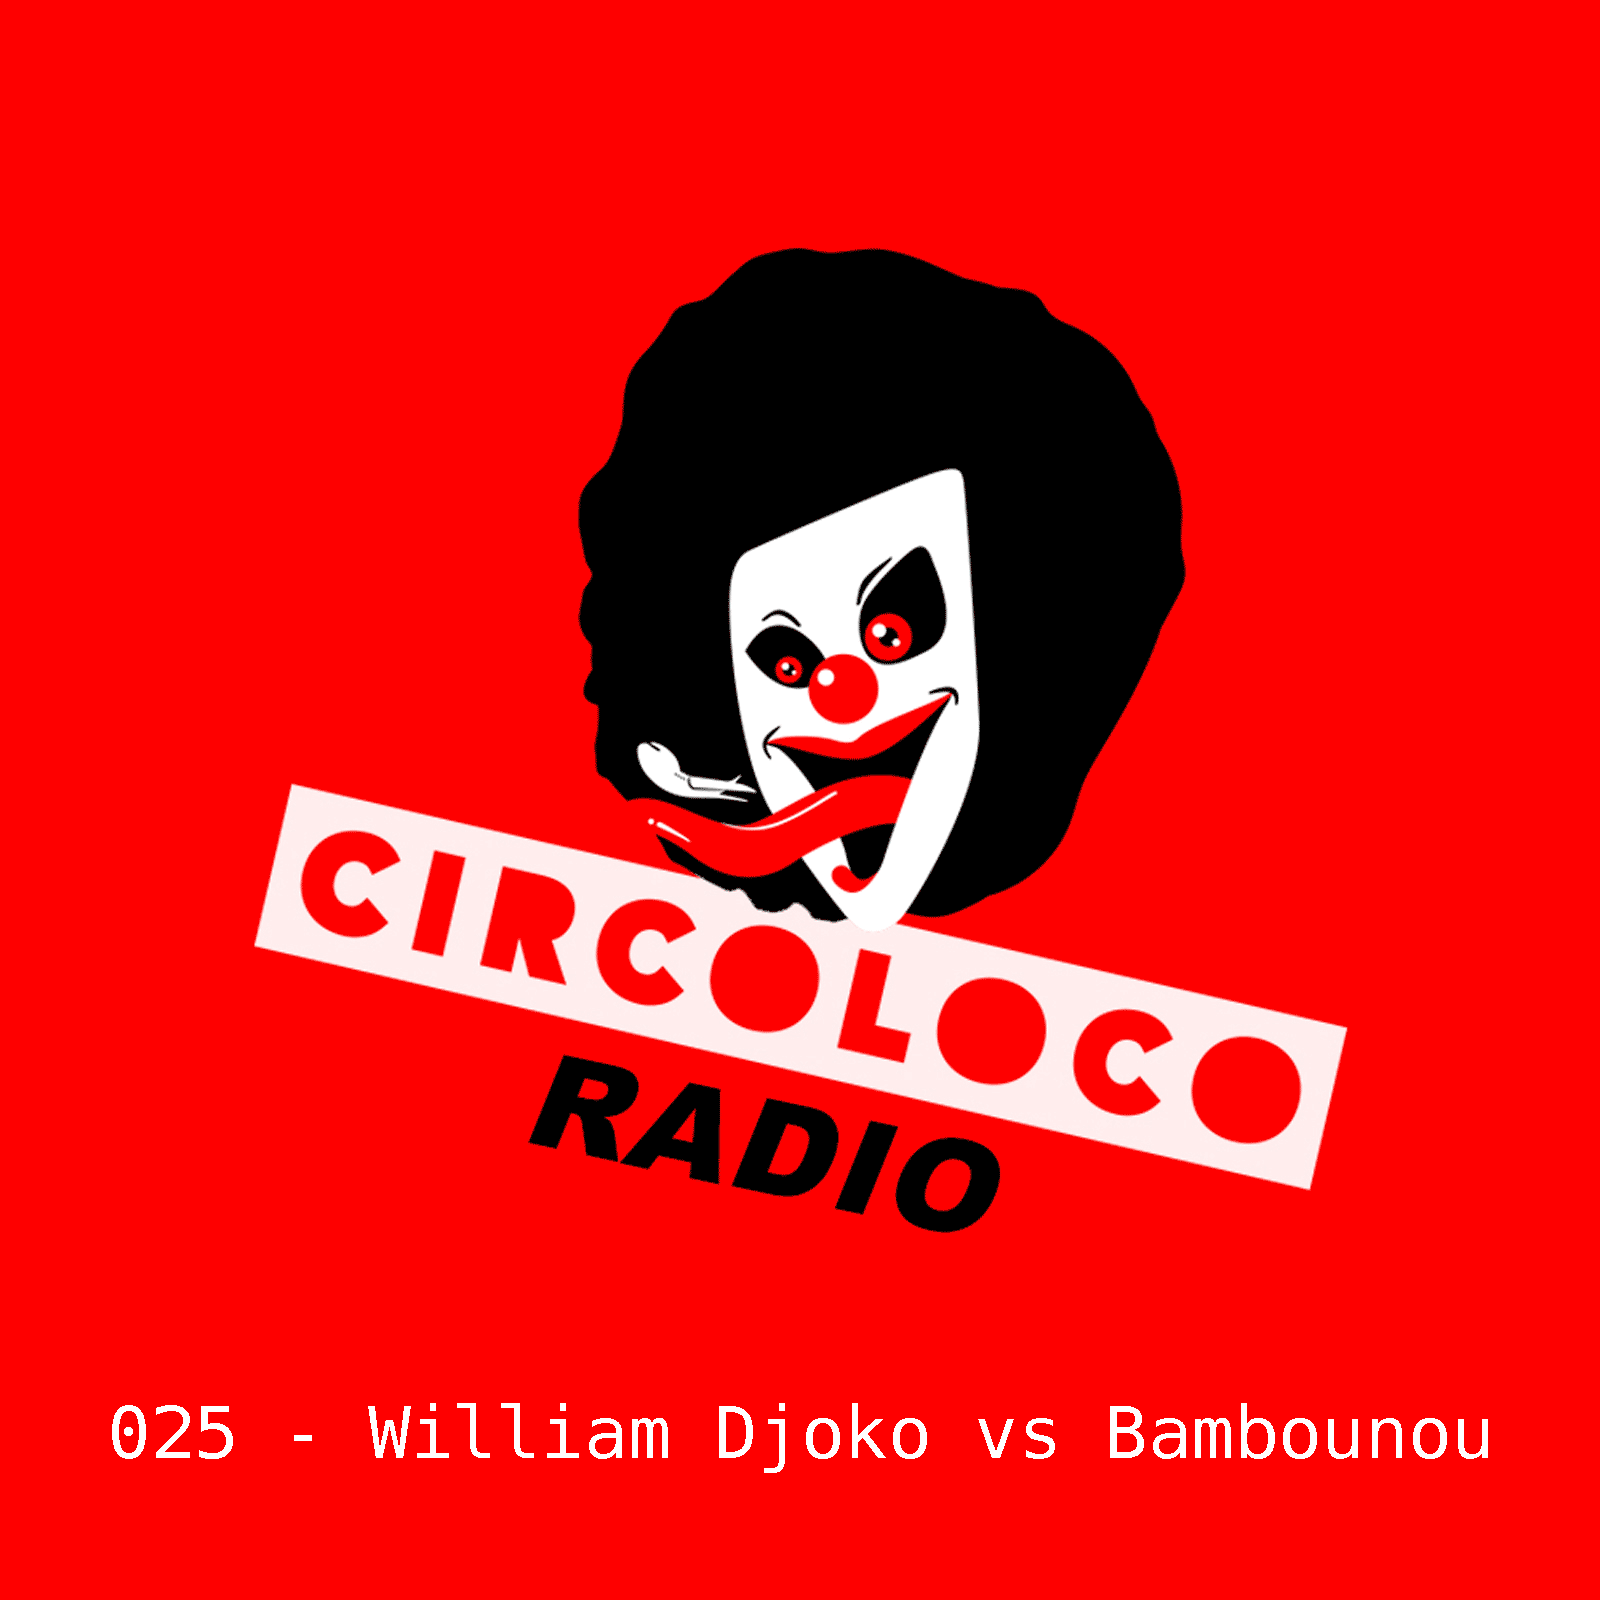 Episode 025, with William Djoko vs Bambounou (from December 26th, 2017)